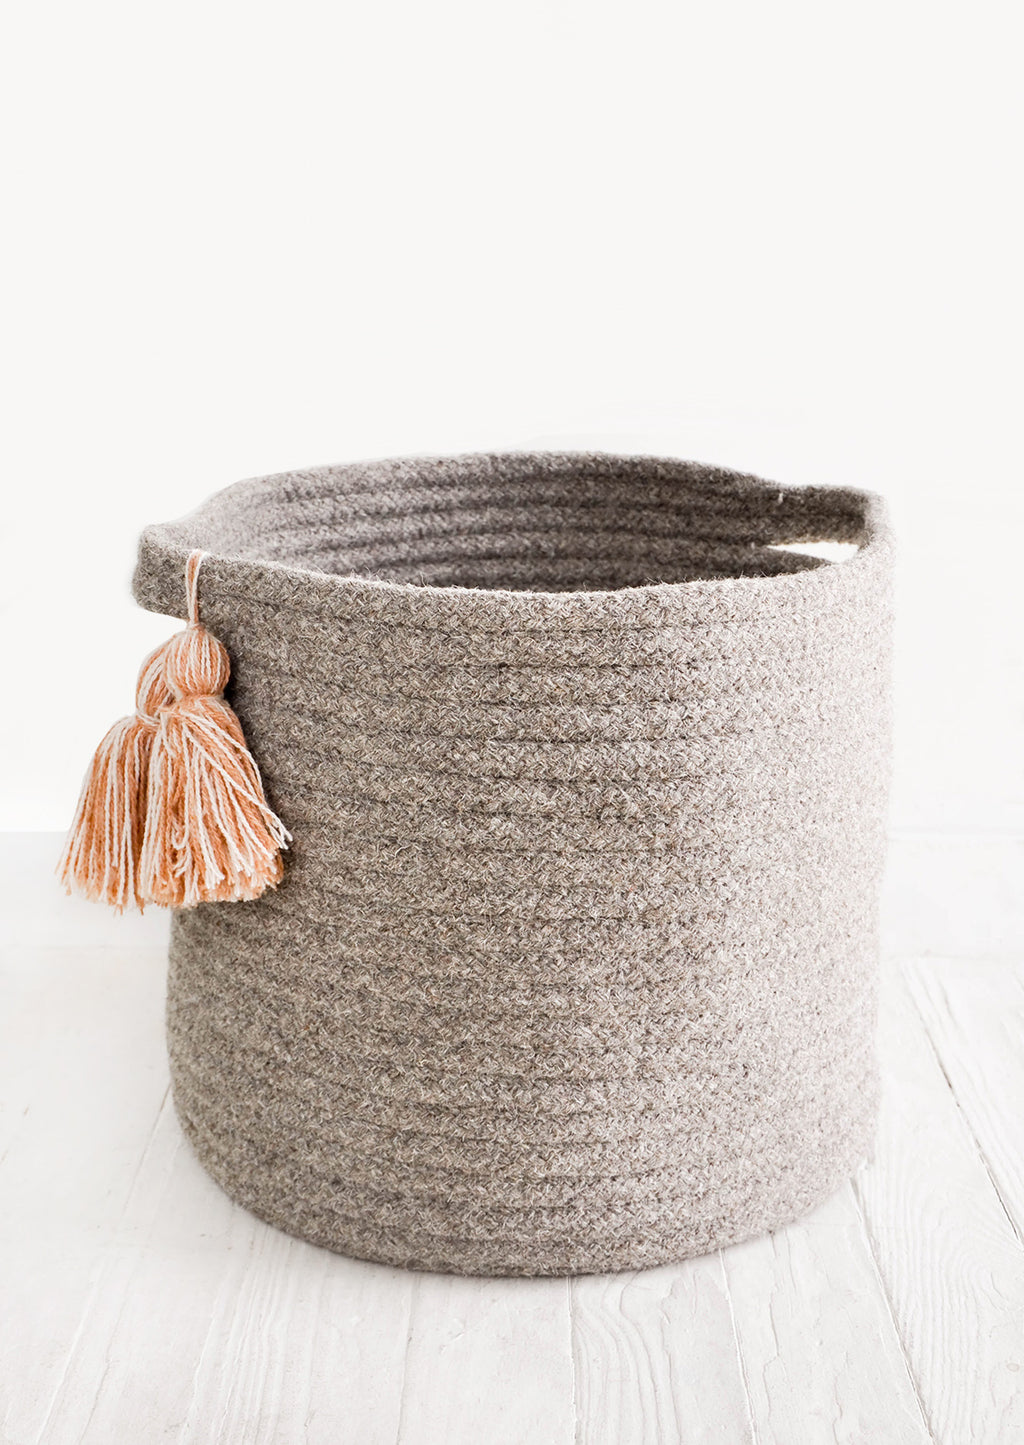 Medium / Taupe: Round, low storage bin in natural wool. Handles at sides with oversized tassel detail.